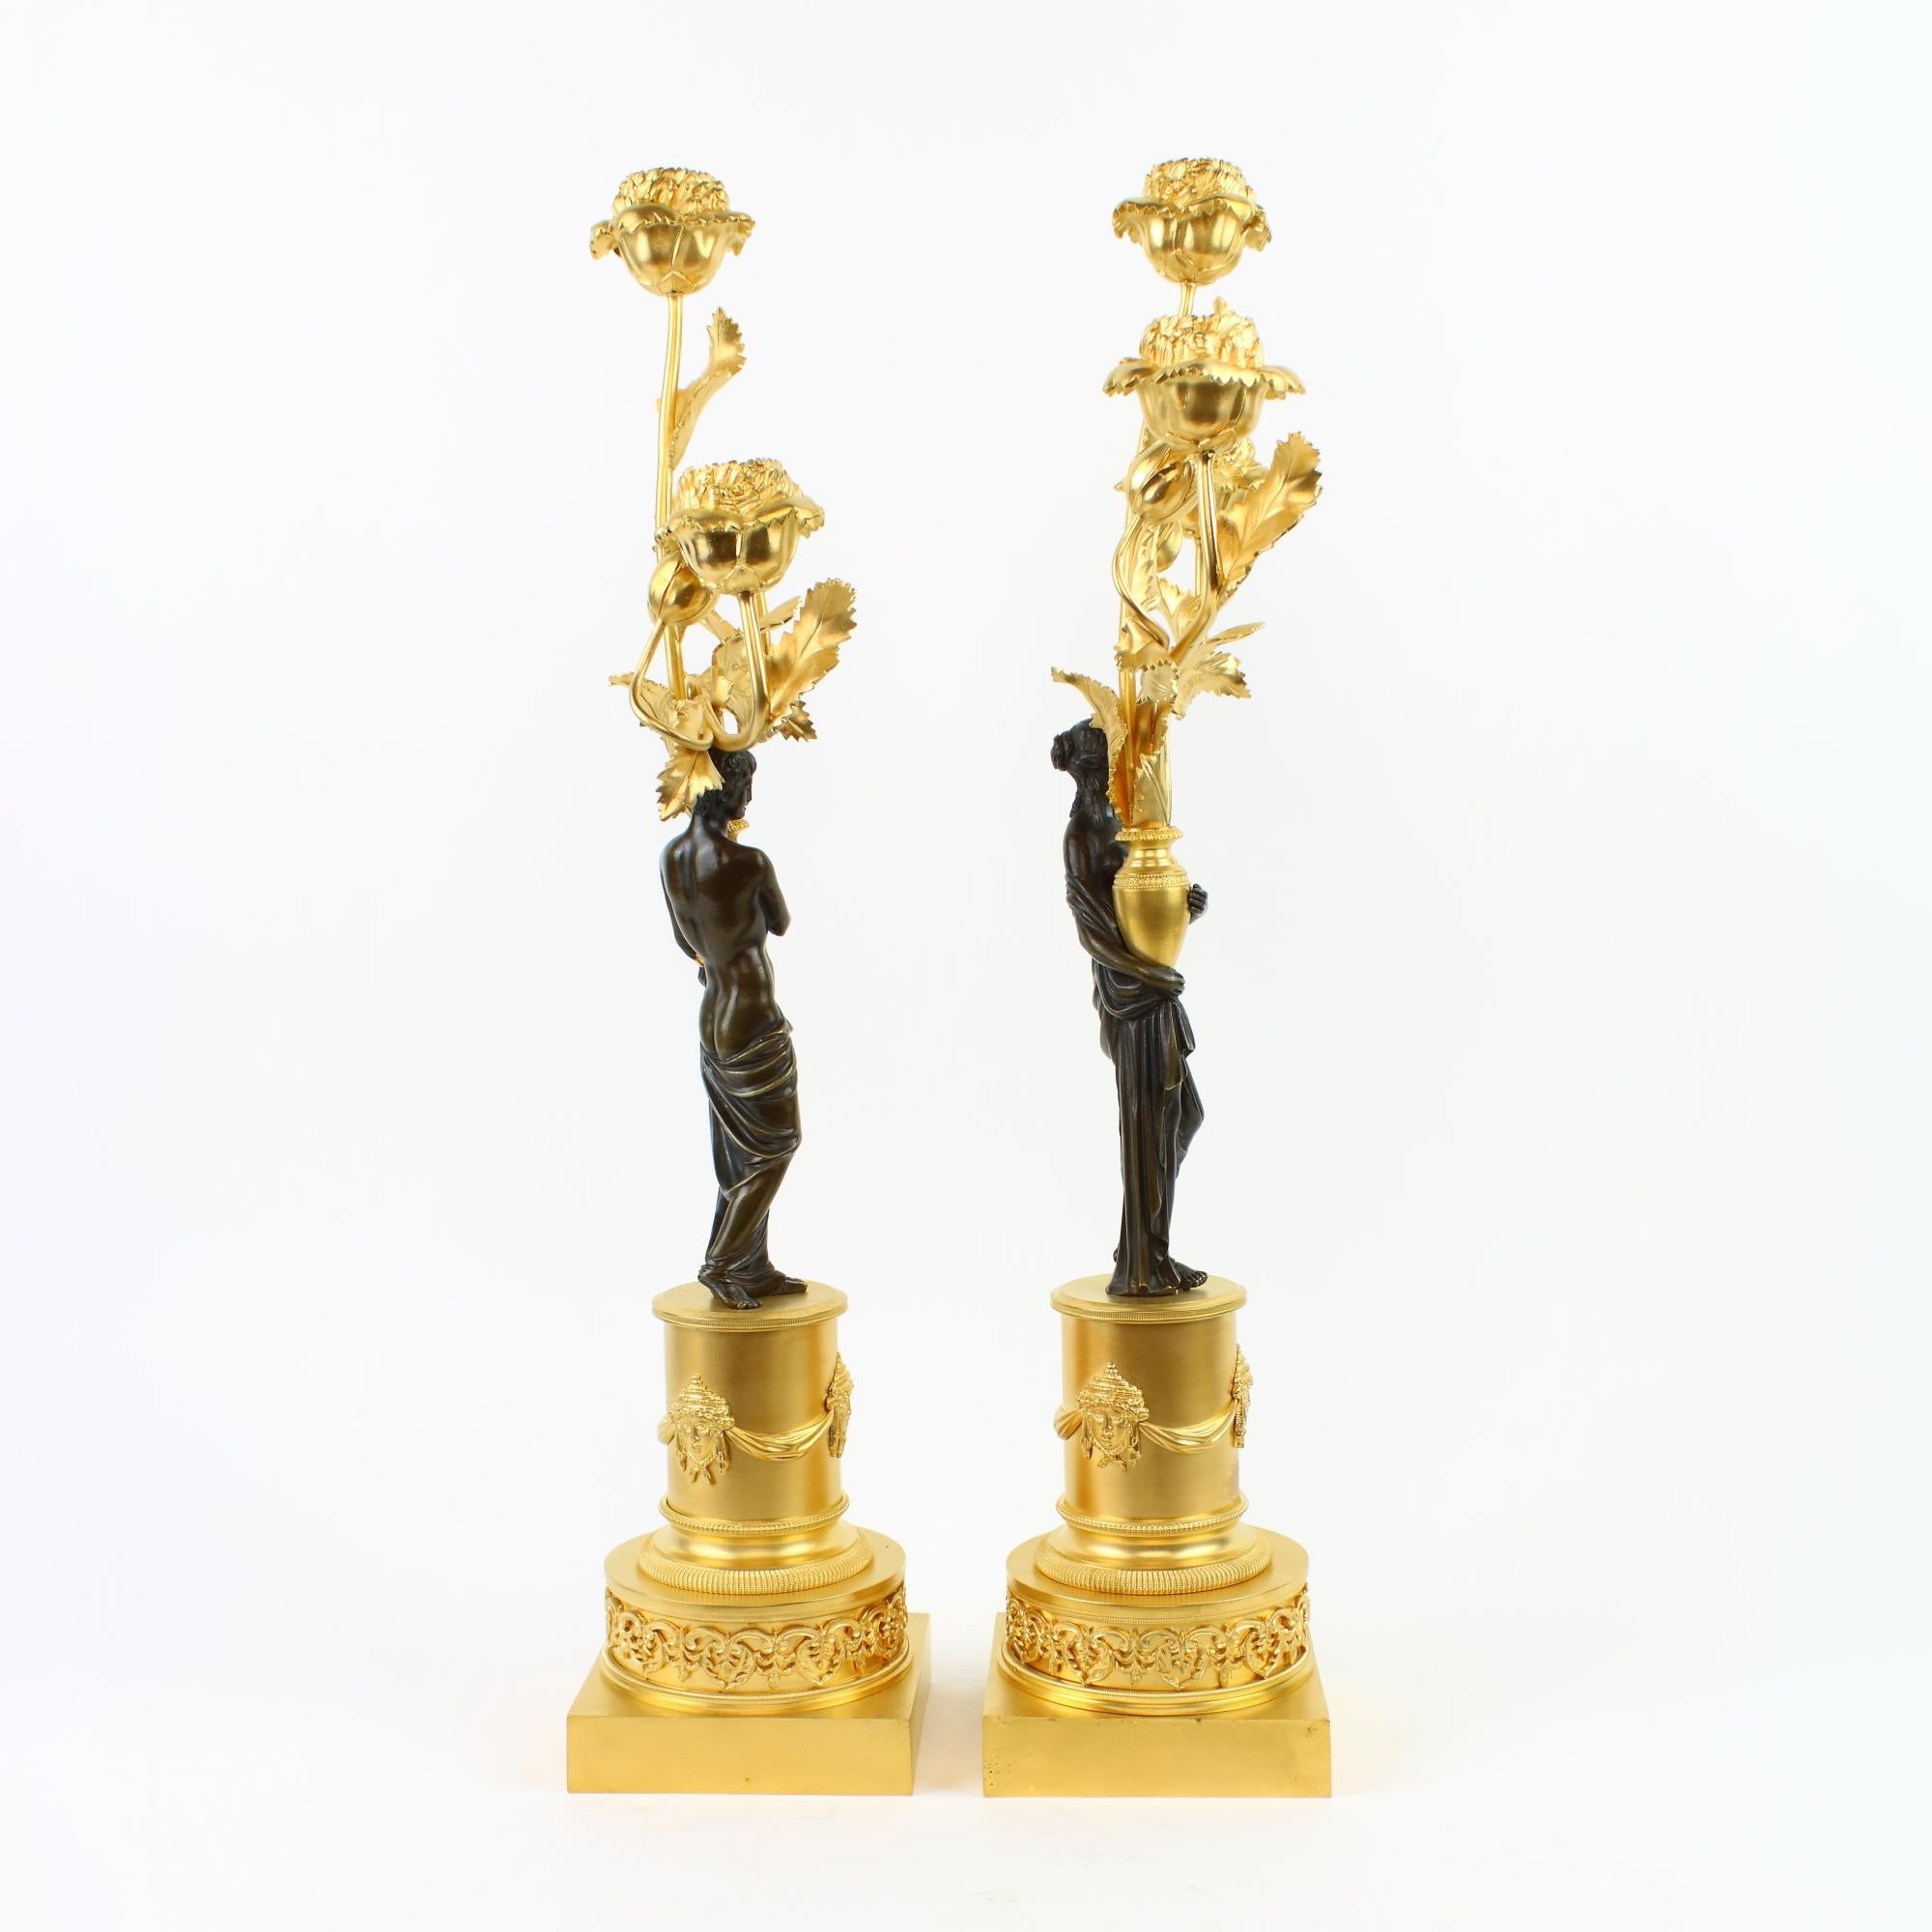 Pair of end of 18th/early 19th century Russian neoclassical figural gilt and patinated bronze candelabra.

Gilt-bronze circular pedestal on rectangular plinth, the base with neoclassical foliate frieze, the pedestal with surrounding frieze of